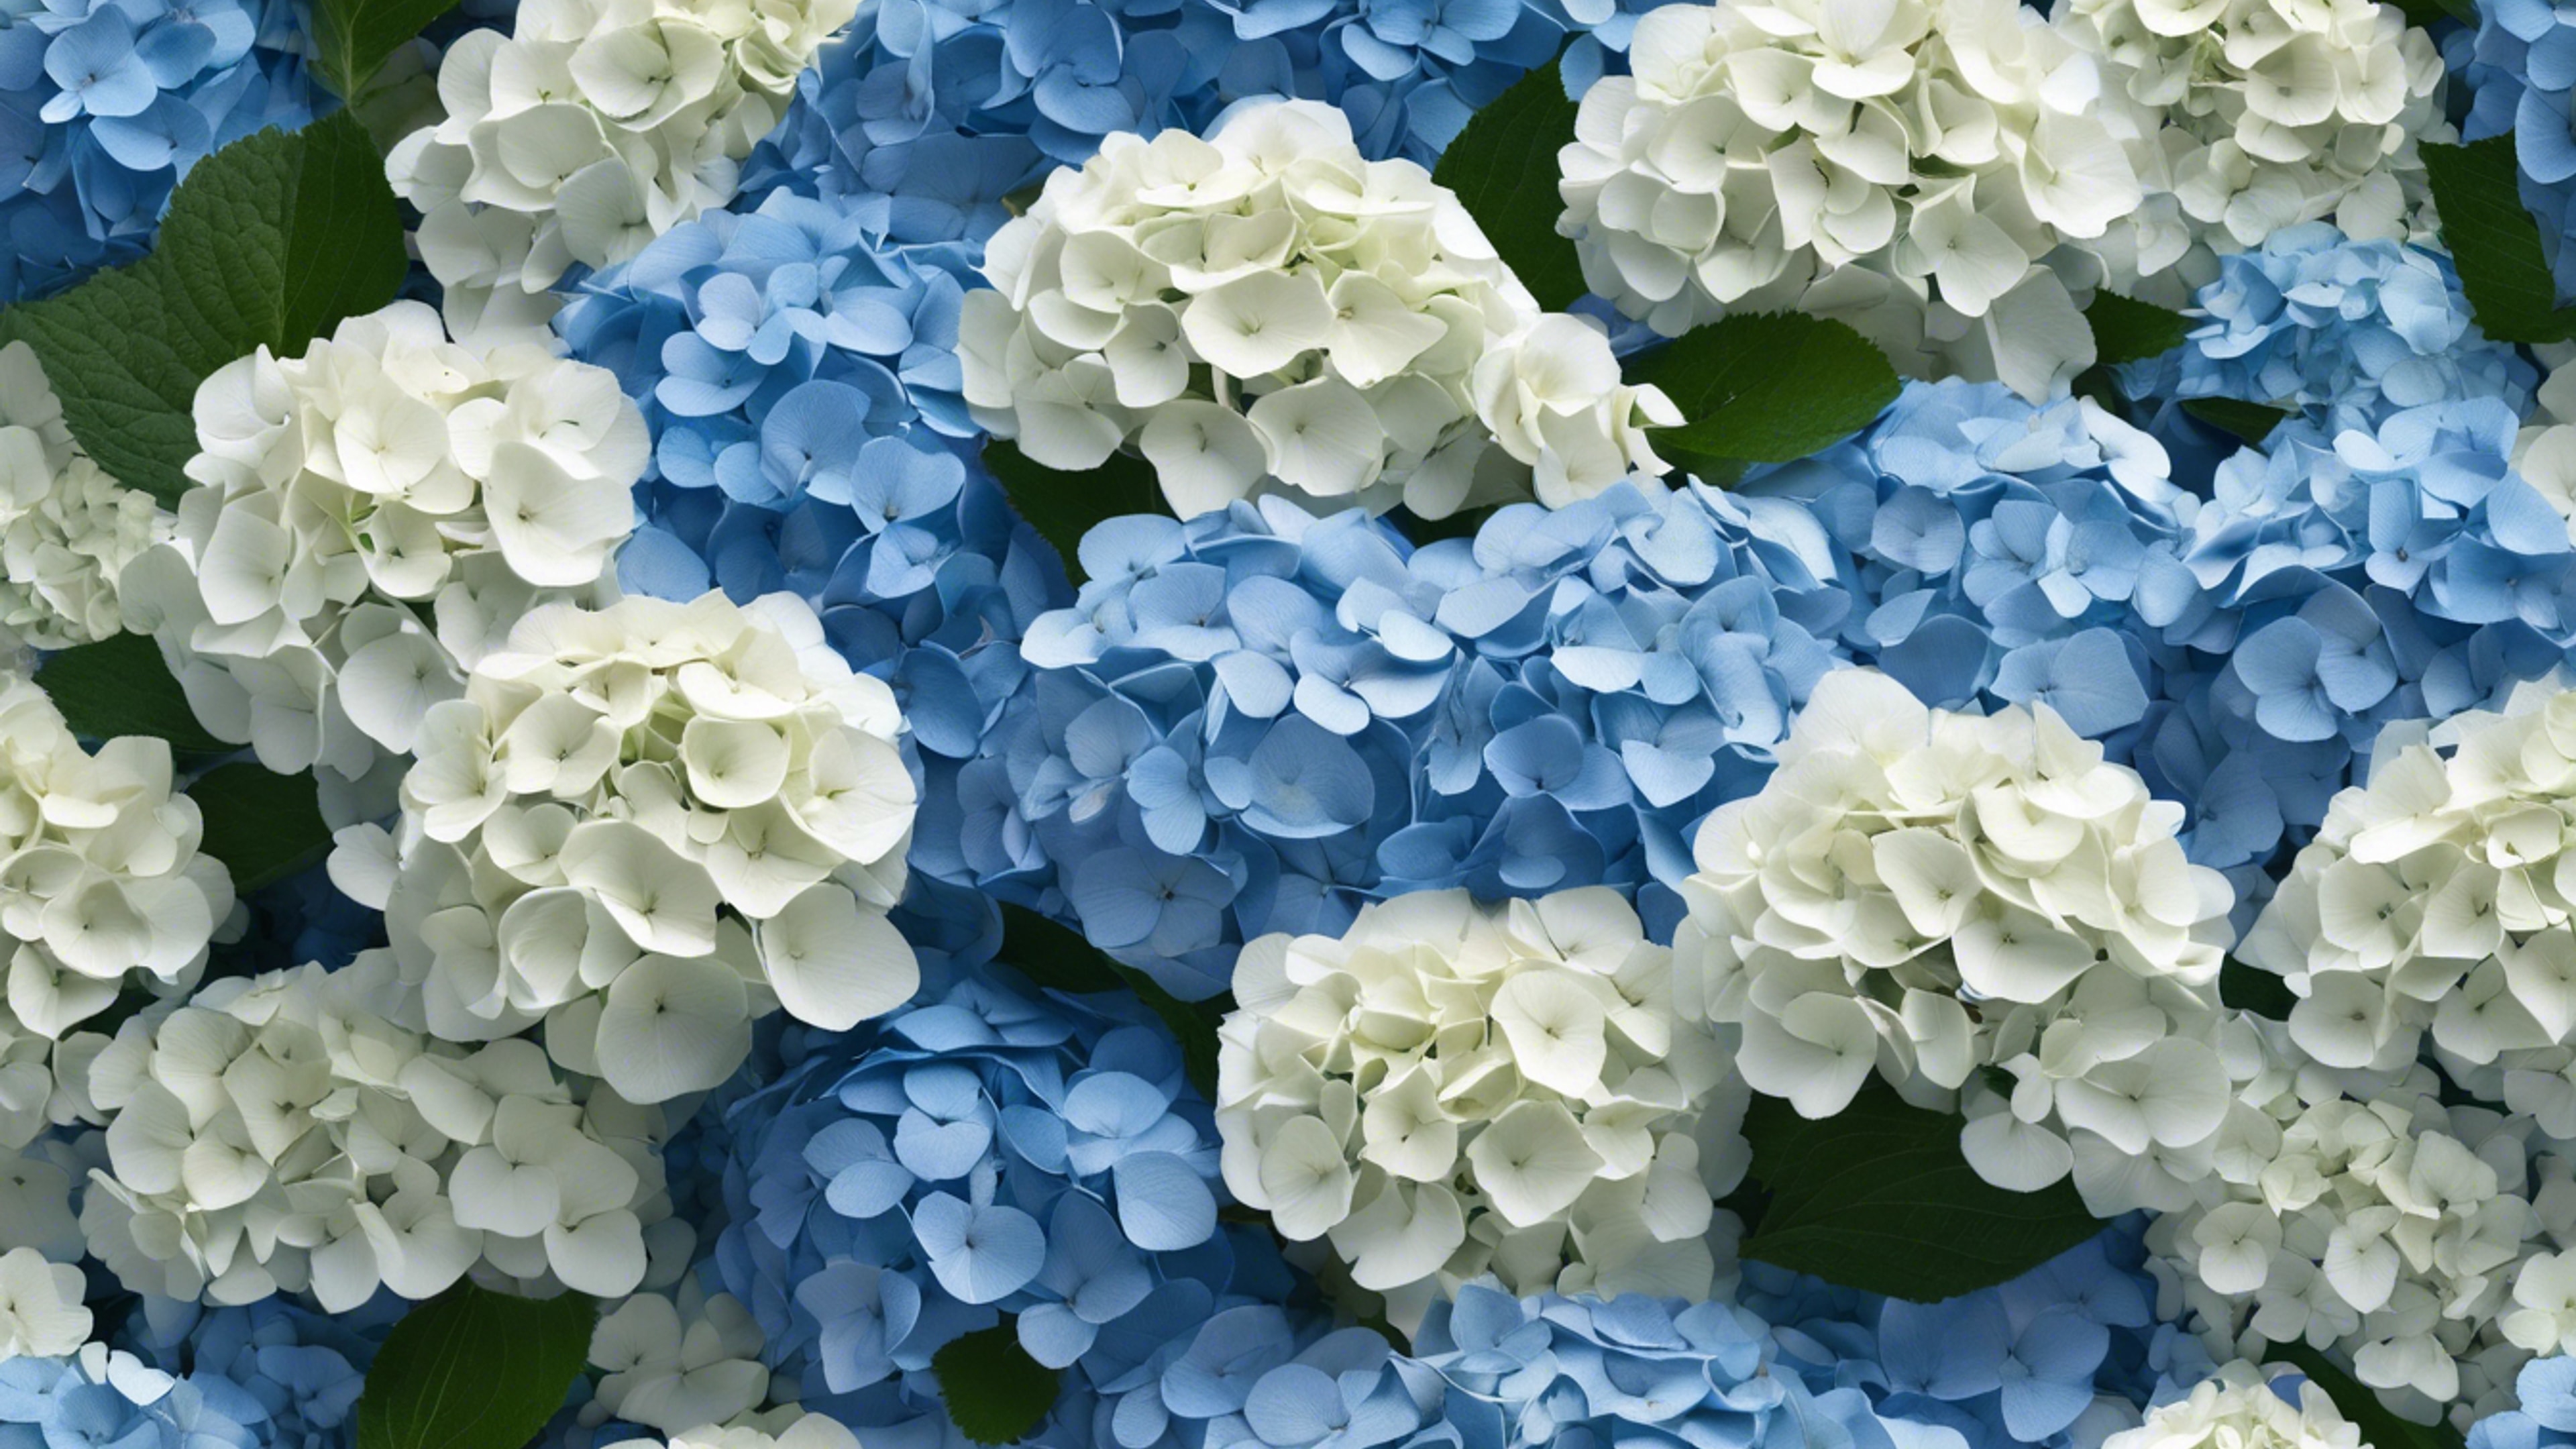 An array of hydrangea flowers in different stages of bloom, forming a gradient from white to deep blue. Hintergrund[1ef5265e01794dabb6ef]